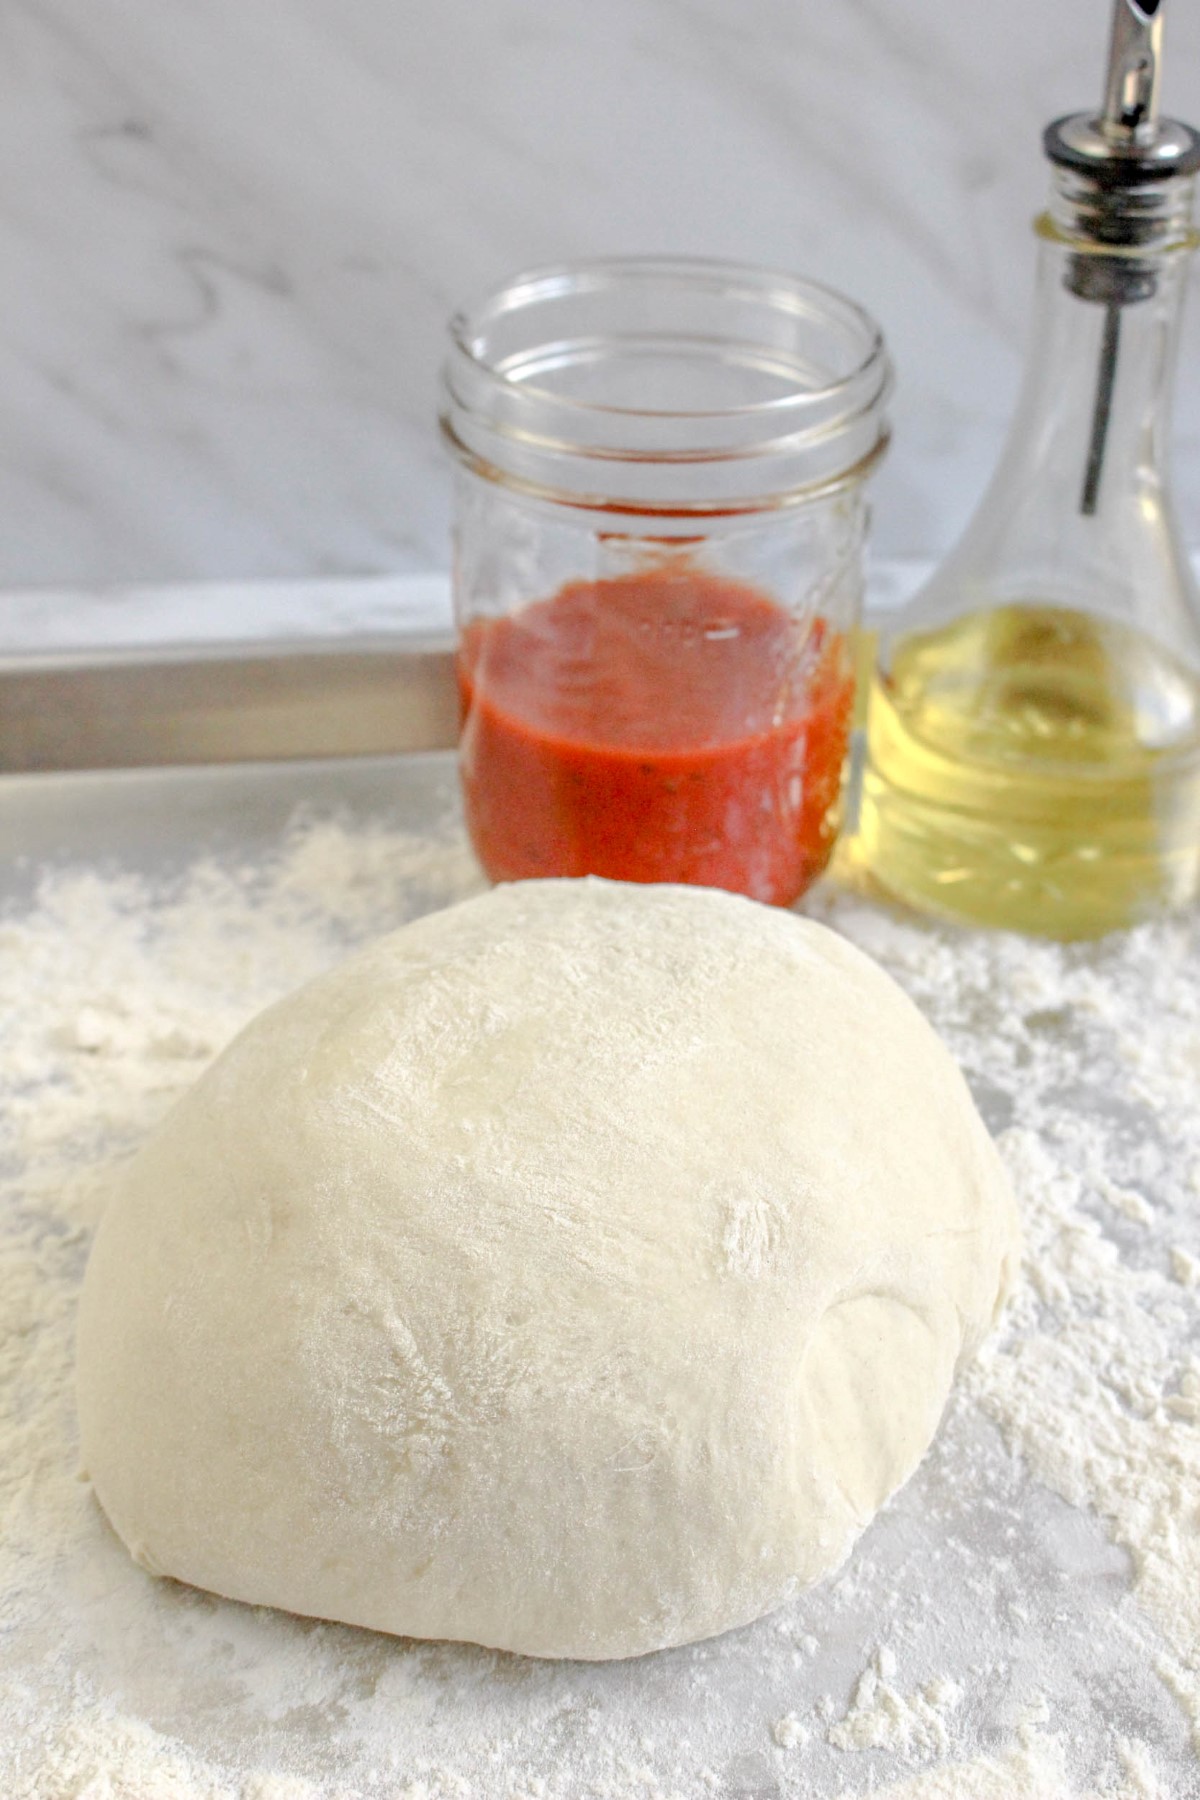 Pizza dough ball on a floured surface with a jar of pizza sauce and a bottle of oil